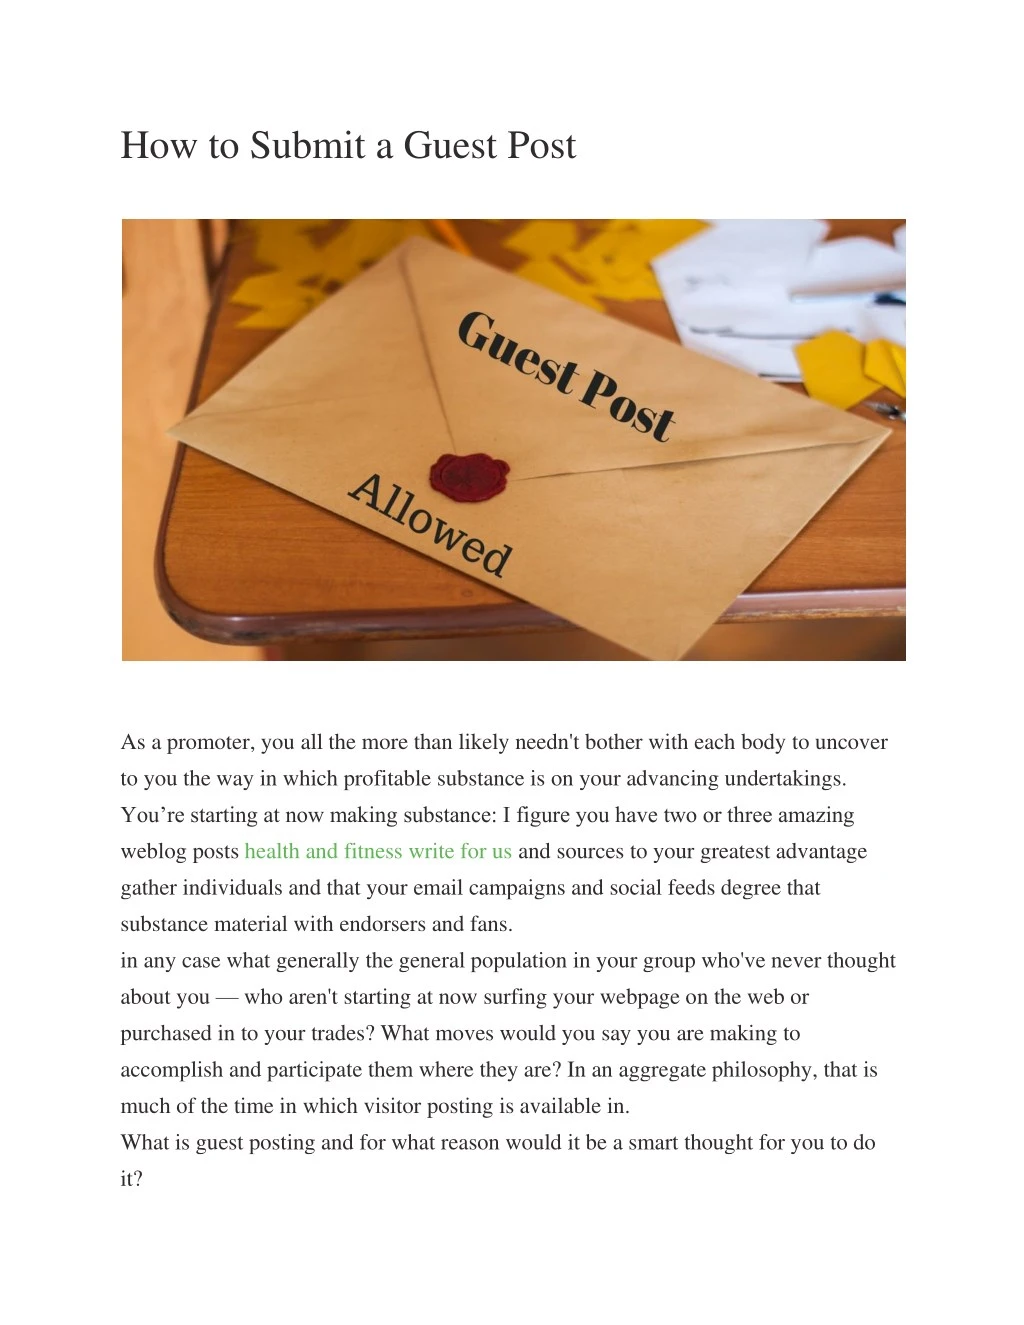 how to submit a guest post